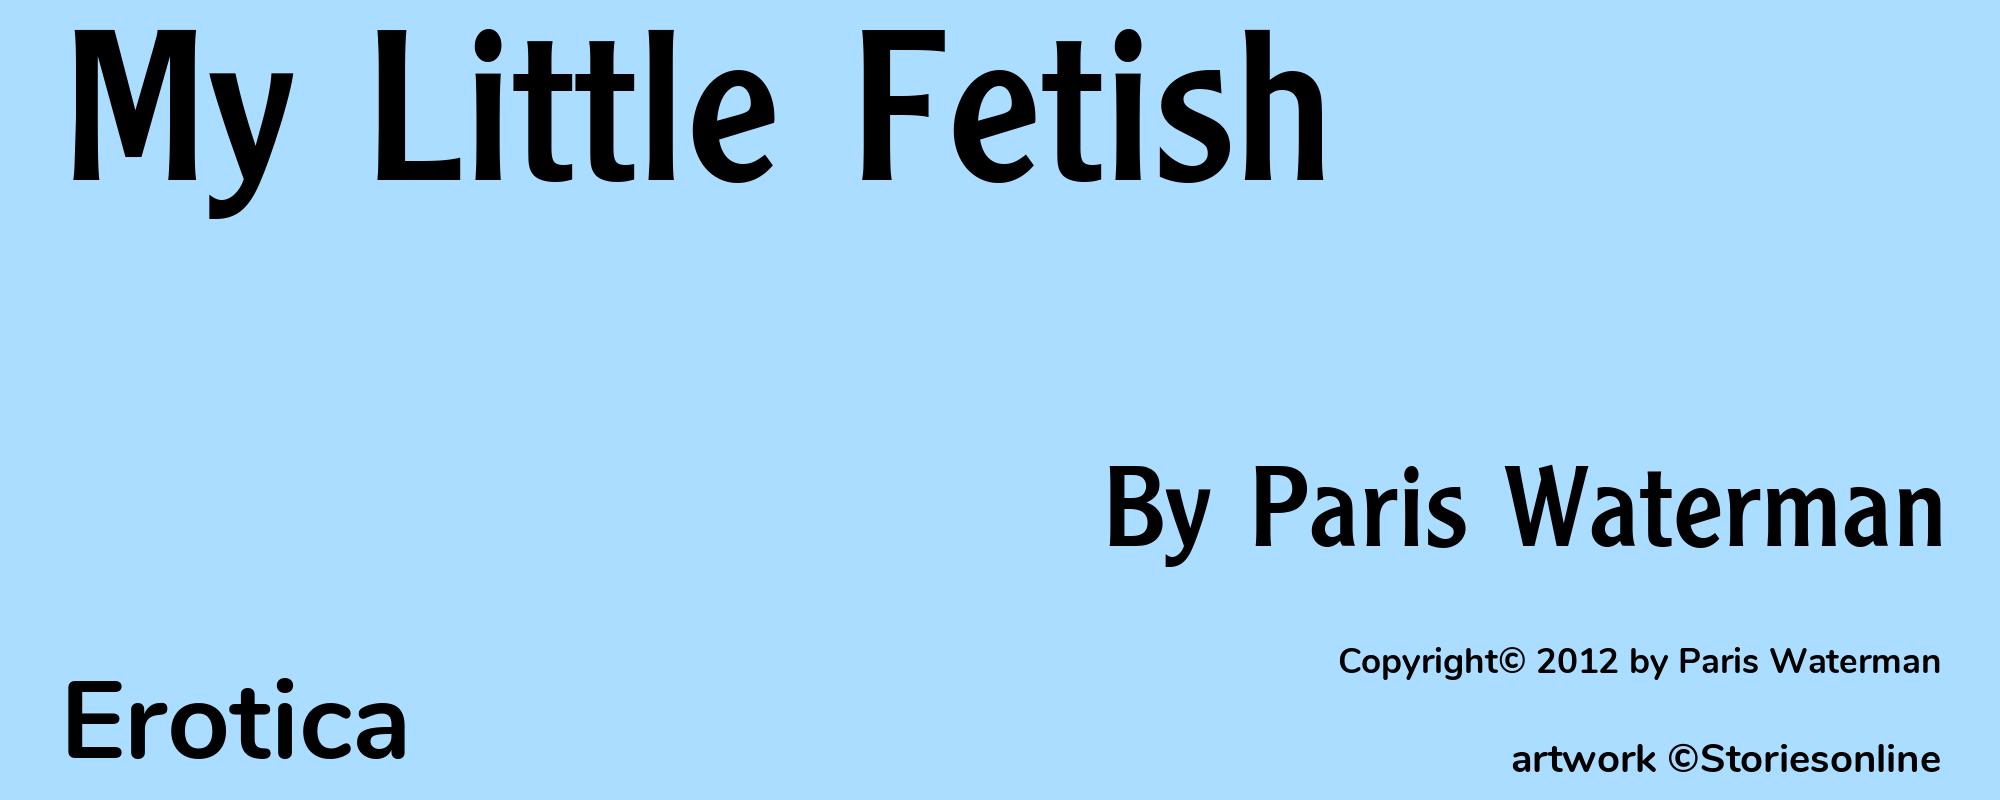 My Little Fetish - Cover